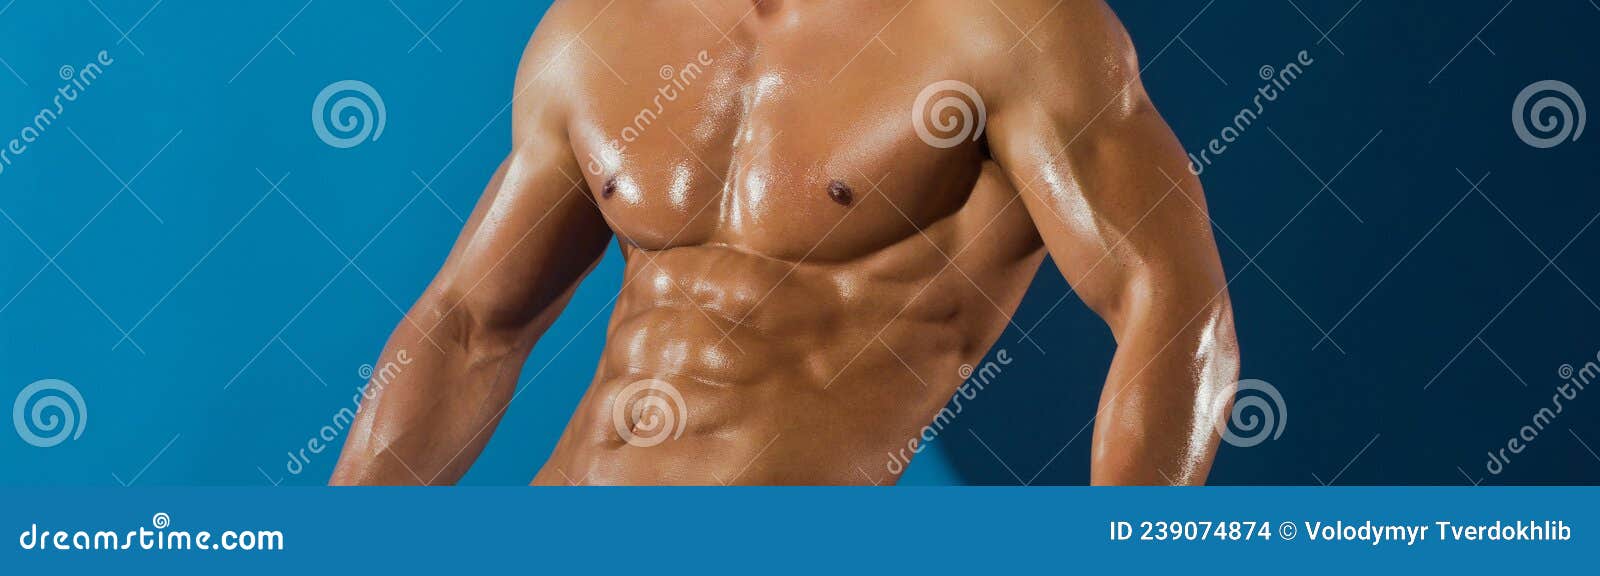 Man with Muscular Body and Bare Chest or Coach Sportsman. Banner ...